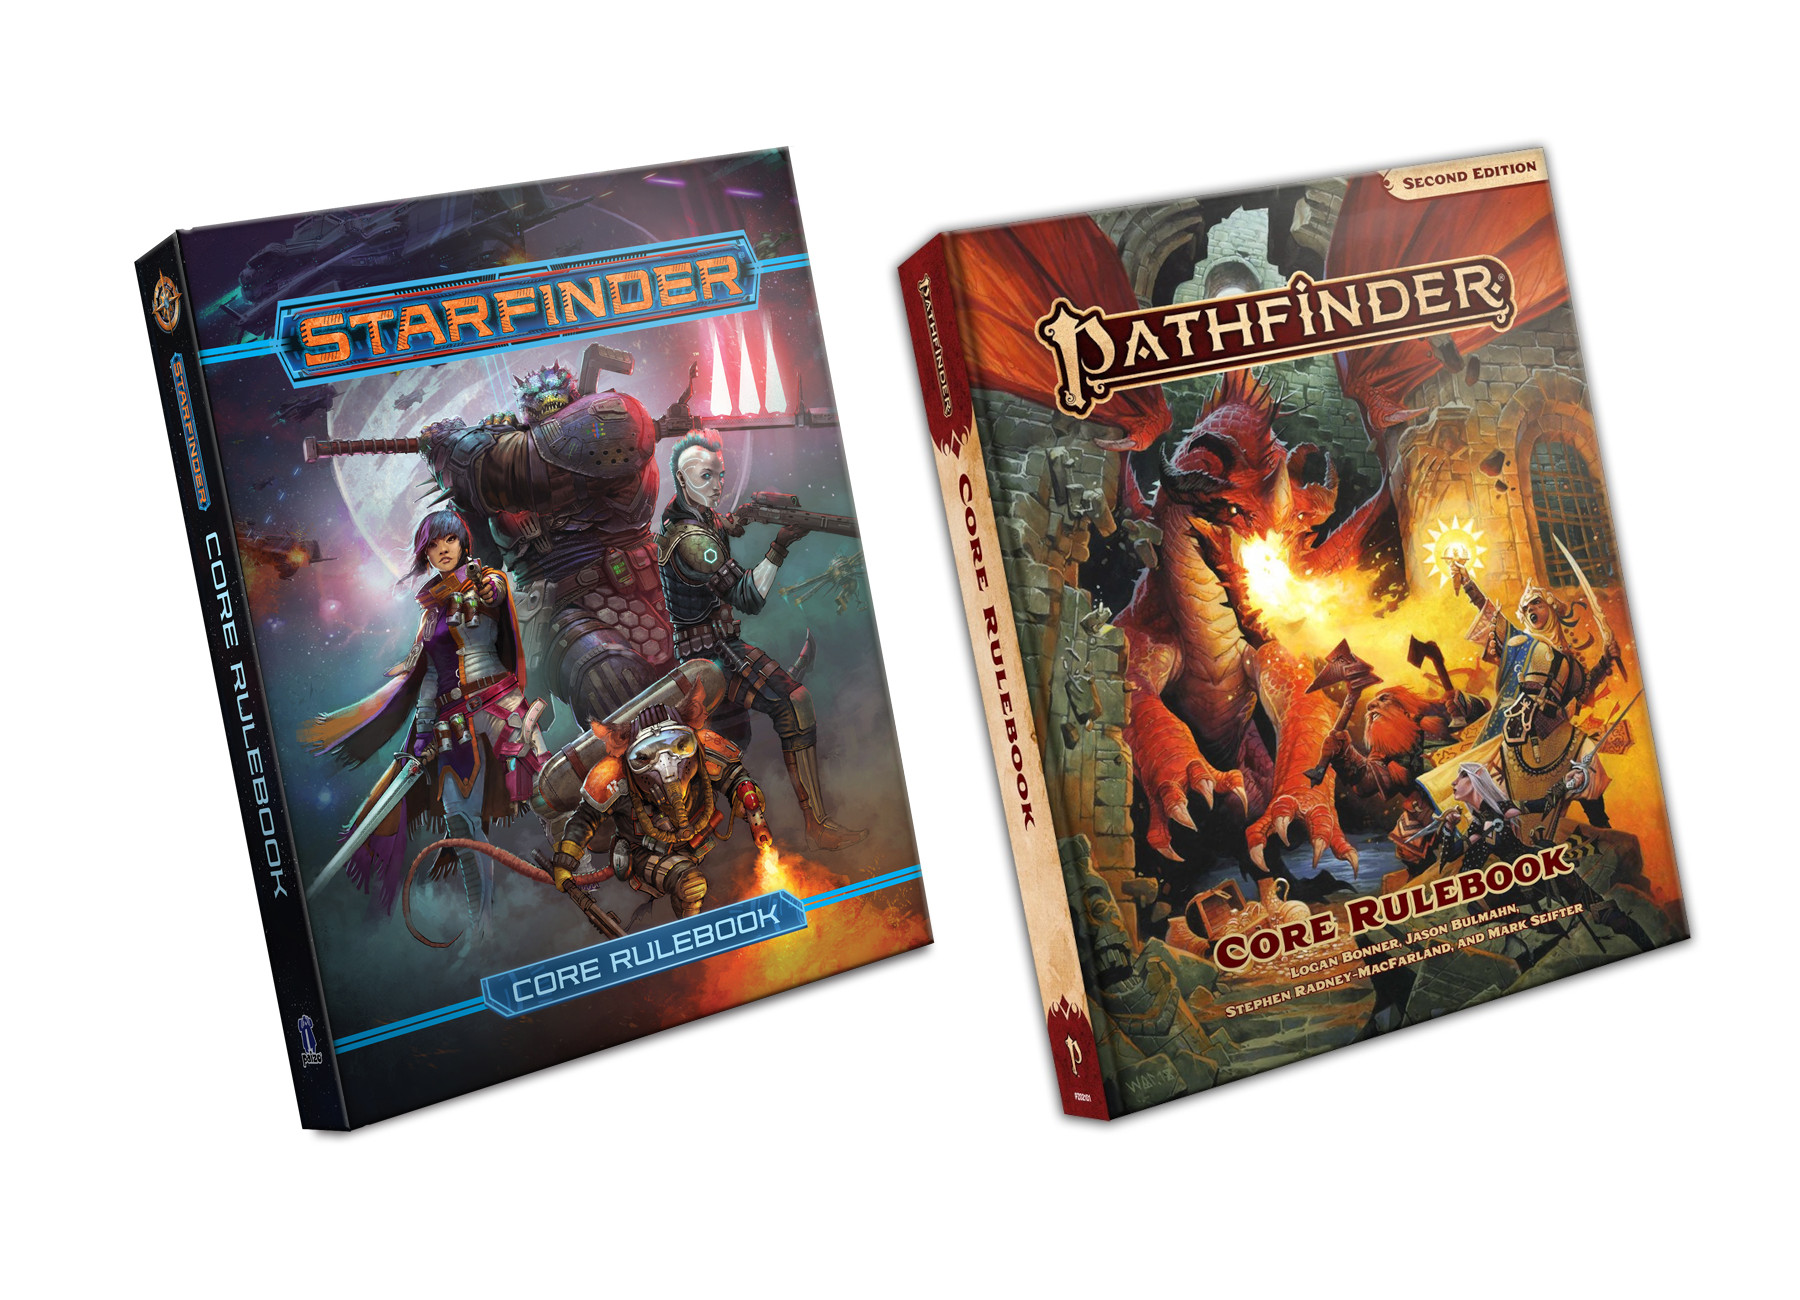 Pathfinder Second Edition Core Rulebook and Starfinder Core Rulebook Digital CD Key [$ 12.58]